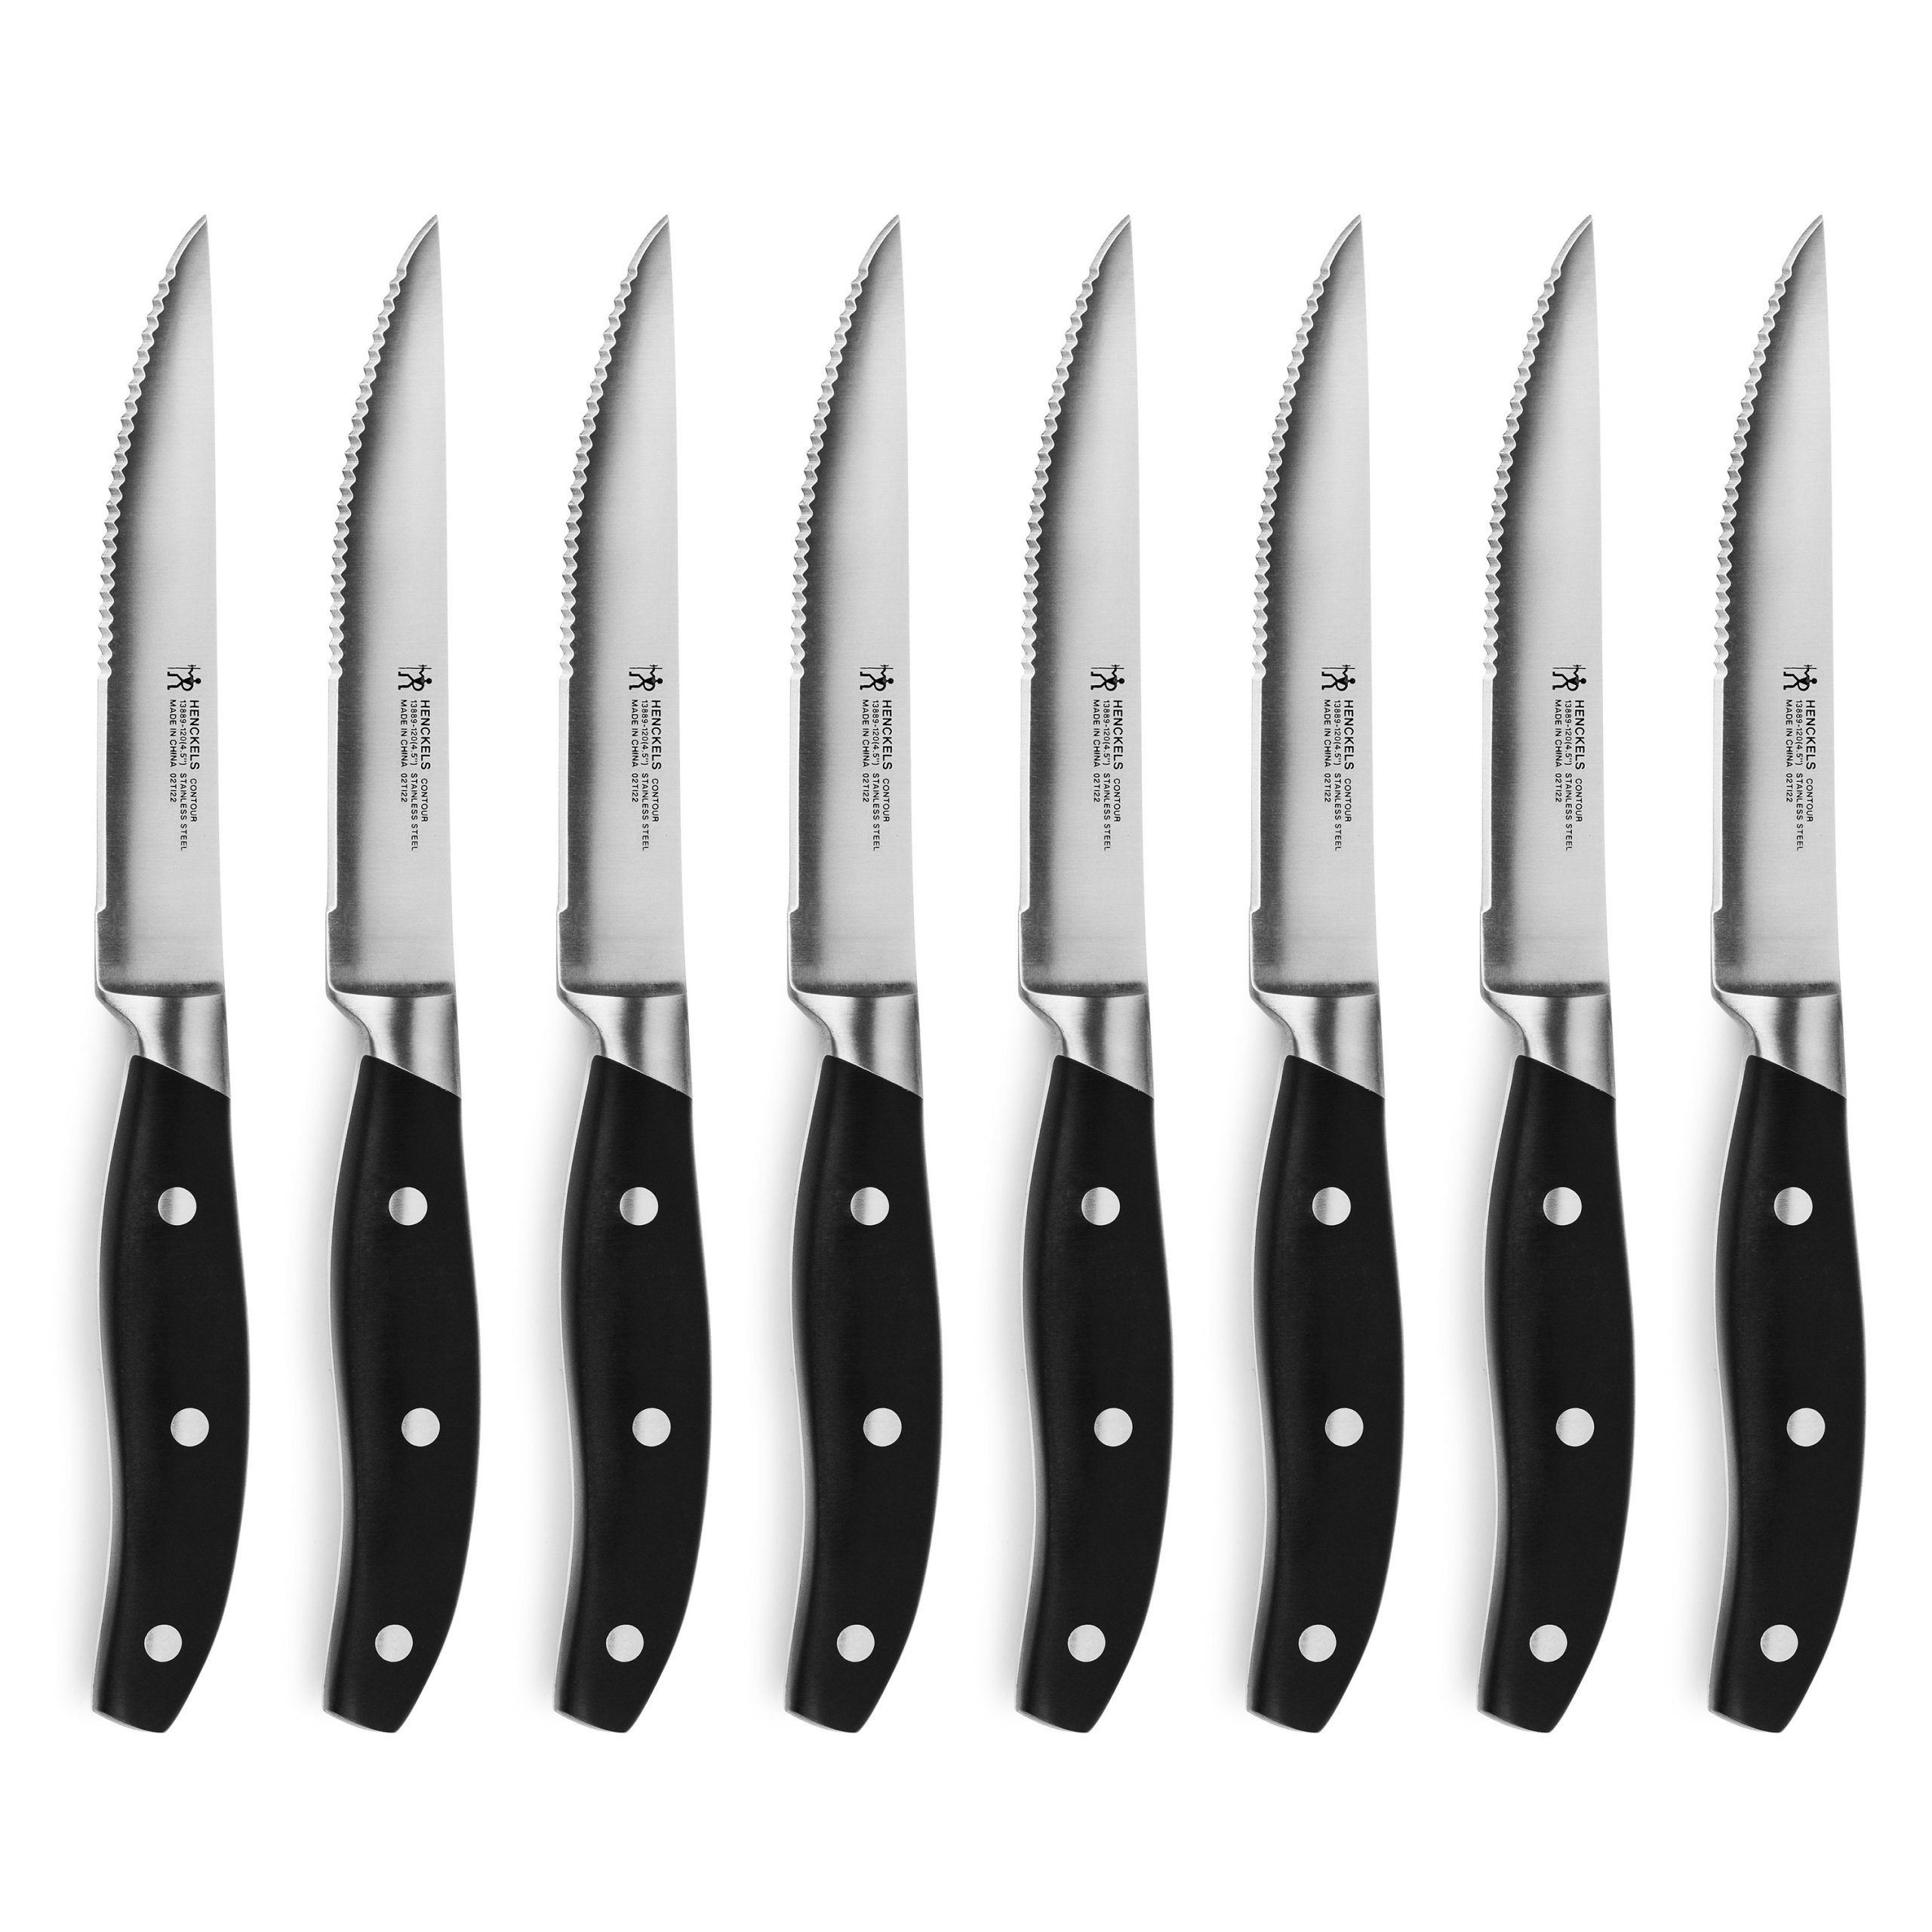 Henckels Forged Serrated Steak Knife Set with Gift Box, Black Handles ...